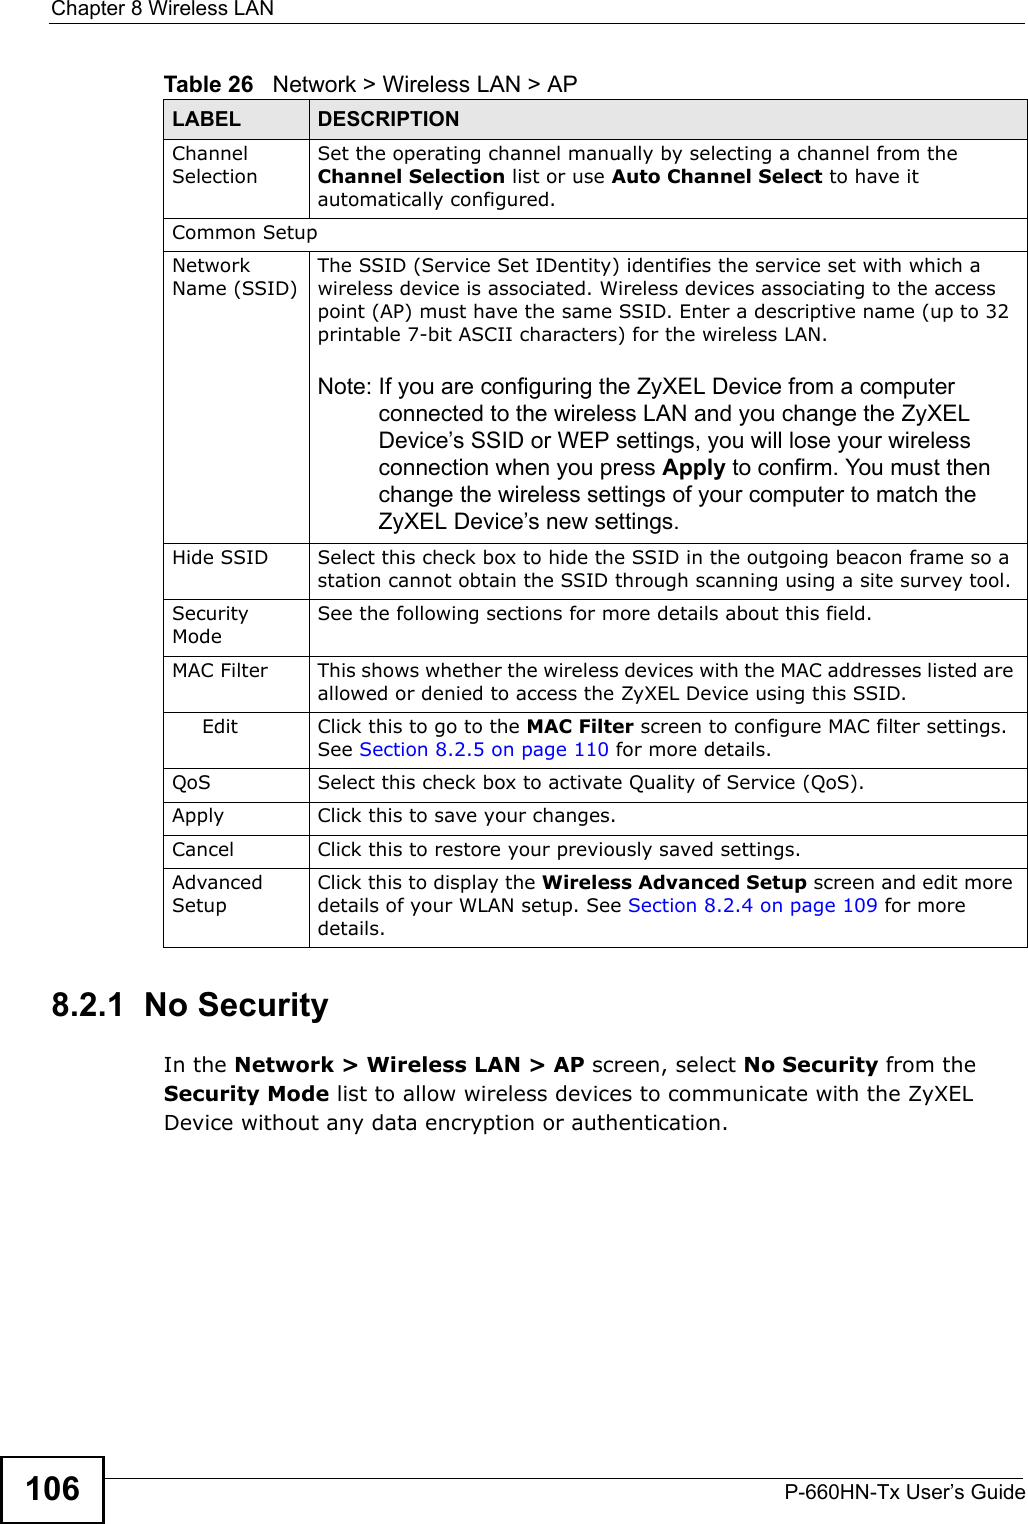 Chapter 8 Wireless LANP-660HN-Tx User’s Guide1068.2.1  No SecurityIn the Network &gt; Wireless LAN &gt; AP screen, select No Security from the Security Mode list to allow wireless devices to communicate with the ZyXEL Device without any data encryption or authentication.Channel SelectionSet the operating channel manually by selecting a channel from the Channel Selection list or use Auto Channel Select to have it automatically configured.Common SetupNetwork Name (SSID)The SSID (Service Set IDentity) identifies the service set with which a wireless device is associated. Wireless devices associating to the access point (AP) must have the same SSID. Enter a descriptive name (up to 32 printable 7-bit ASCII characters) for the wireless LAN. Note: If you are configuring the ZyXEL Device from a computer connected to the wireless LAN and you change the ZyXEL Device’s SSID or WEP settings, you will lose your wireless connection when you press Apply to confirm. You must then change the wireless settings of your computer to match the ZyXEL Device’s new settings.Hide SSID Select this check box to hide the SSID in the outgoing beacon frame so a station cannot obtain the SSID through scanning using a site survey tool.Security ModeSee the following sections for more details about this field.MAC Filter  This shows whether the wireless devices with the MAC addresses listed are allowed or denied to access the ZyXEL Device using this SSID.Edit Click this to go to the MAC Filter screen to configure MAC filter settings. See Section 8.2.5 on page 110 for more details.QoS Select this check box to activate Quality of Service (QoS). Apply Click this to save your changes.Cancel Click this to restore your previously saved settings.Advanced SetupClick this to display the Wireless Advanced Setup screen and edit more details of your WLAN setup. See Section 8.2.4 on page 109 for more details.Table 26   Network &gt; Wireless LAN &gt; APLABEL DESCRIPTION